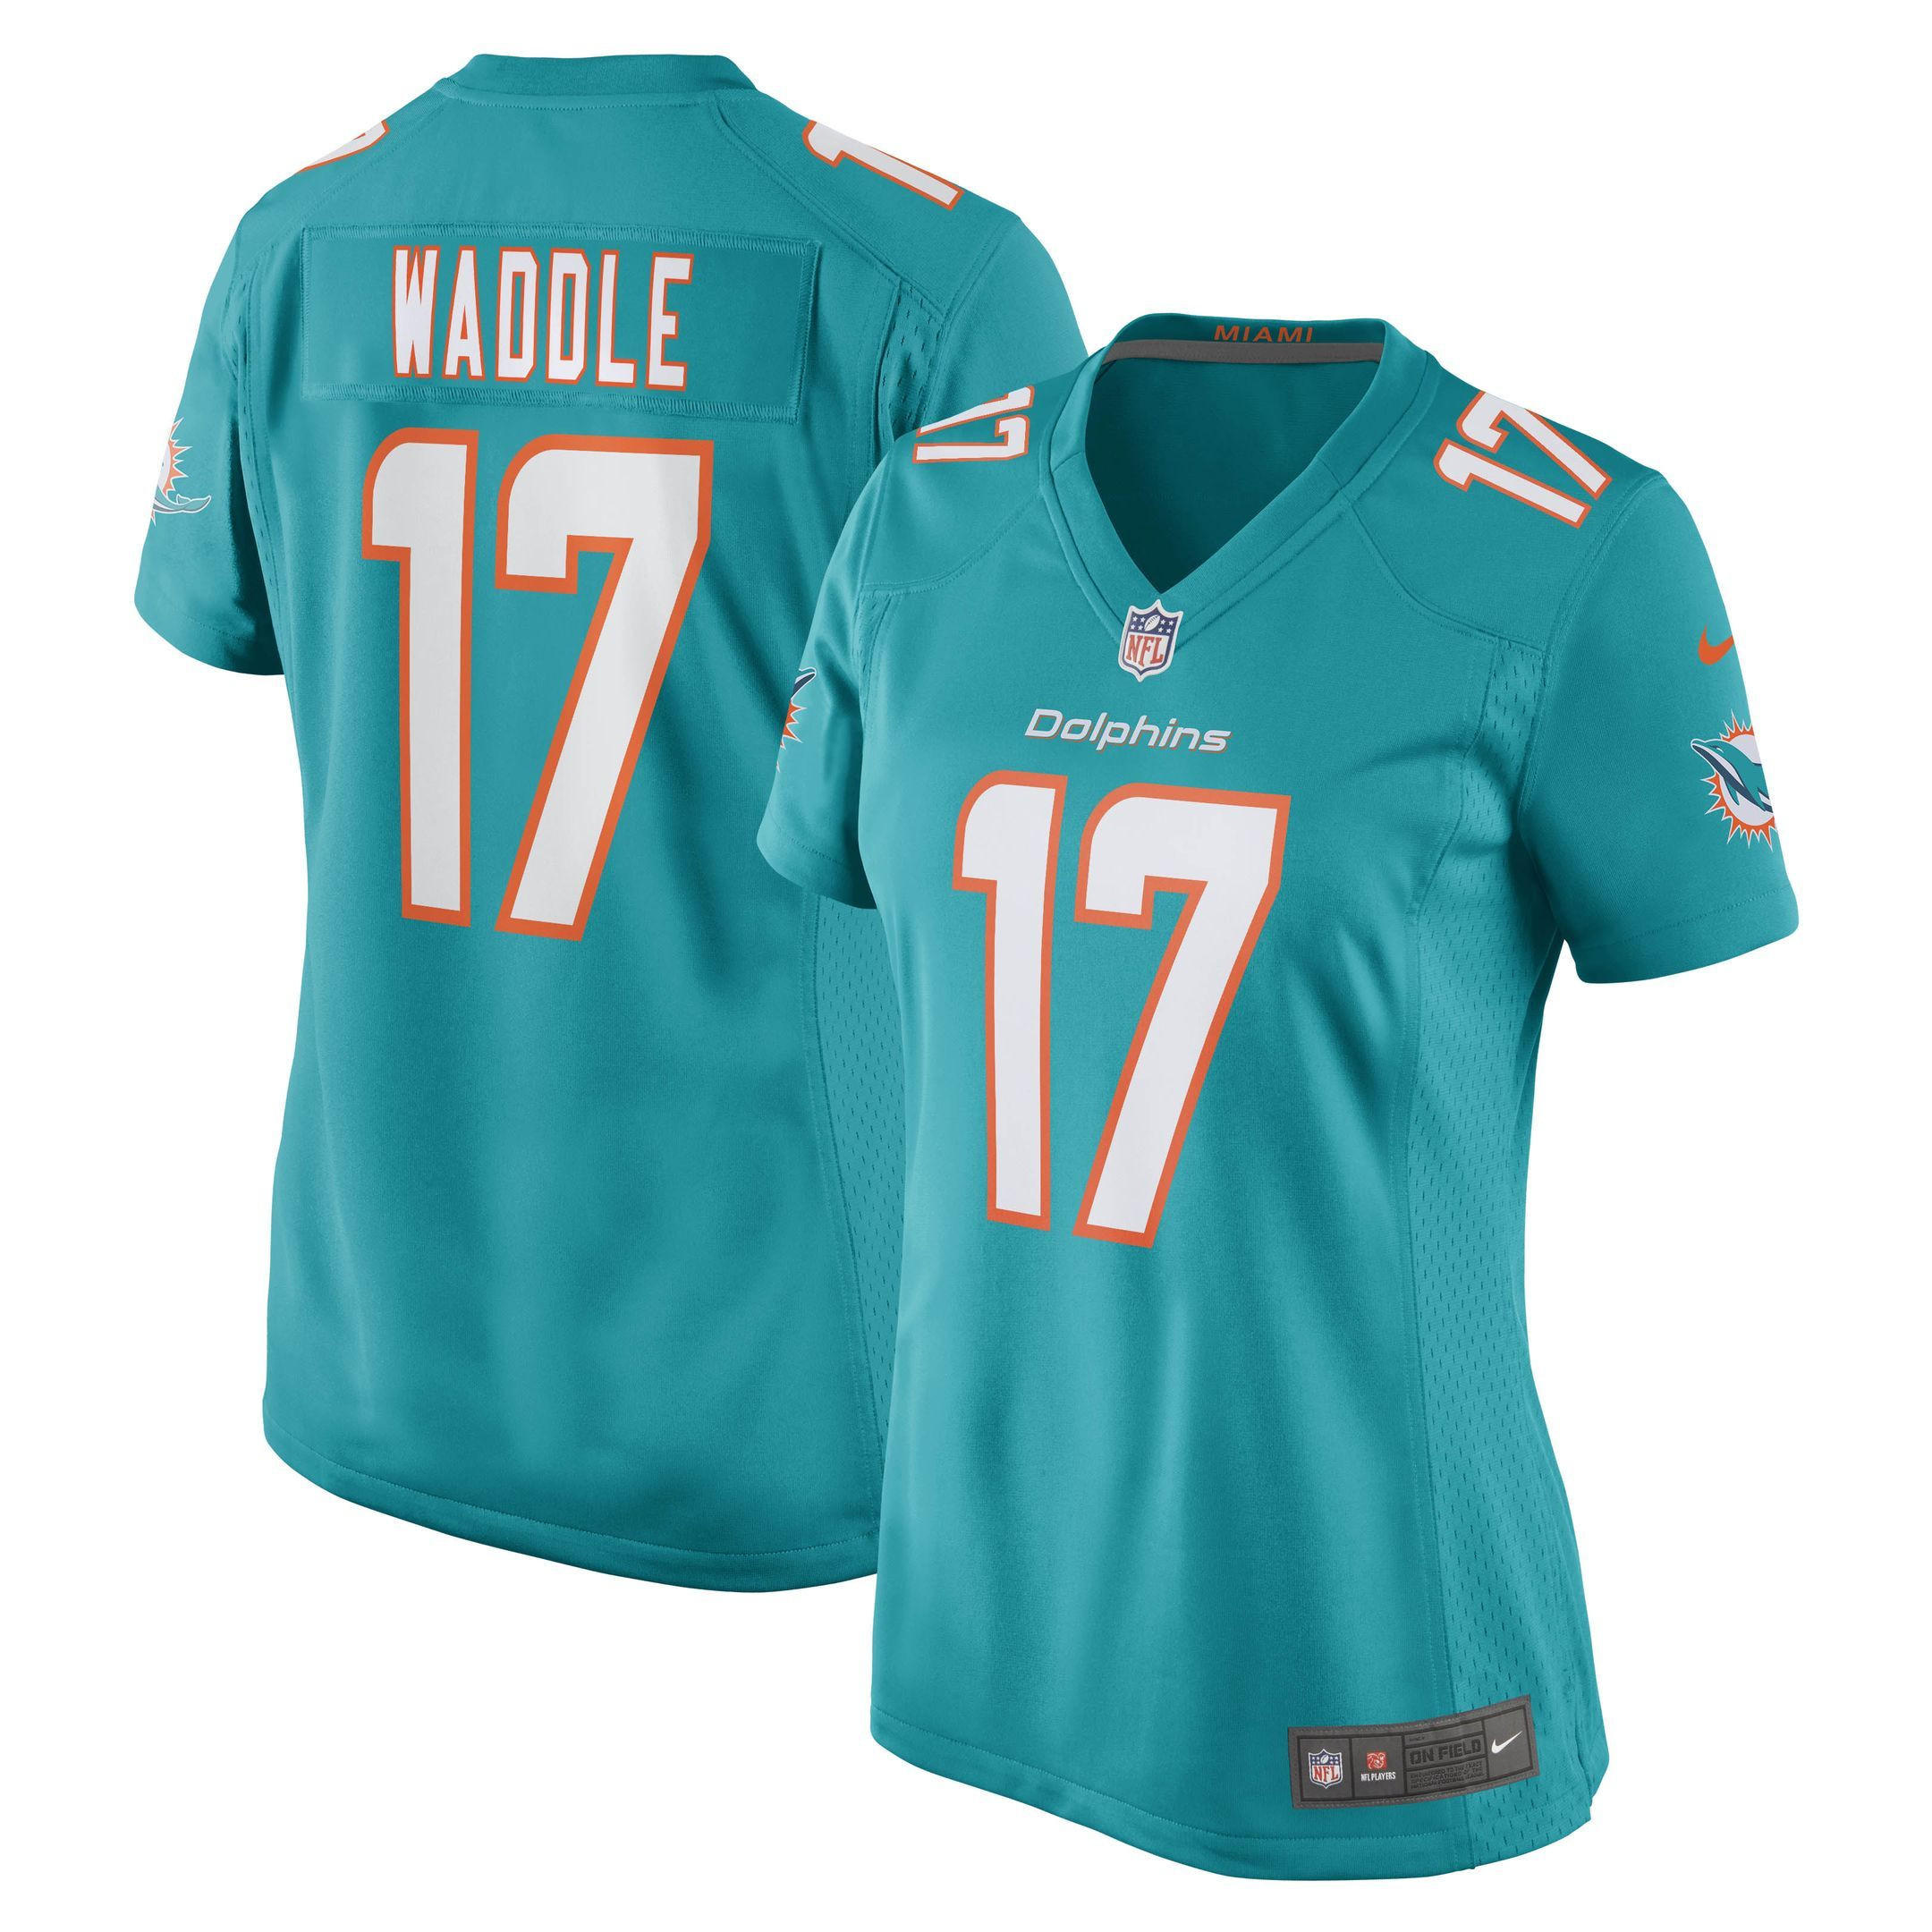 Womens Miami Dolphins Jaylen Waddle Aqua Game Player Jersey Gift for Miami Dolphins fans